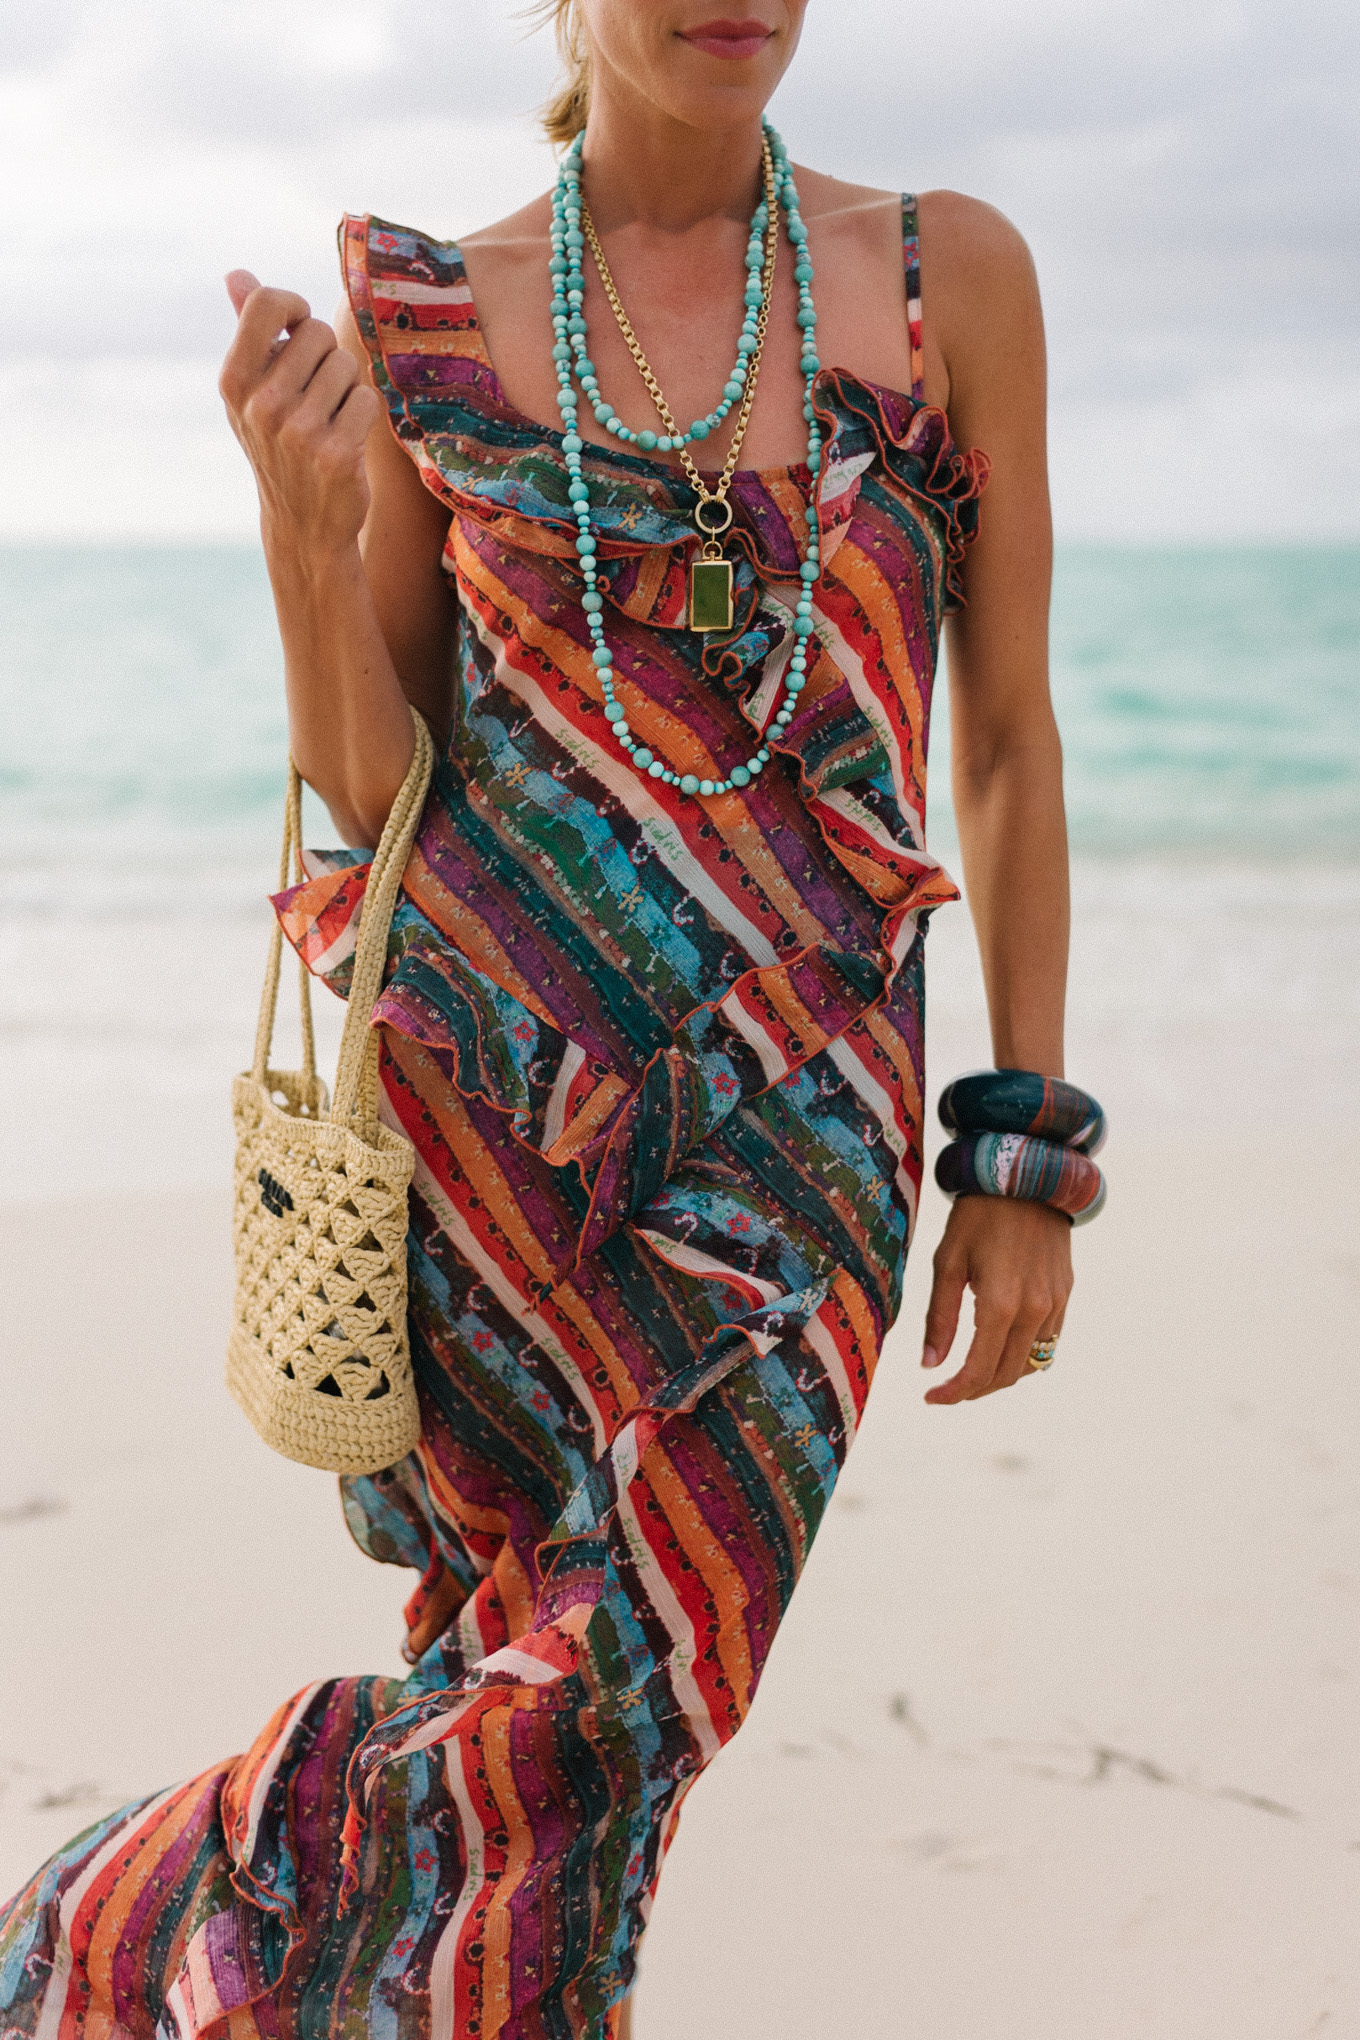 Rainbow striped ruffle maxi dress turquoise bead necklace woven bag